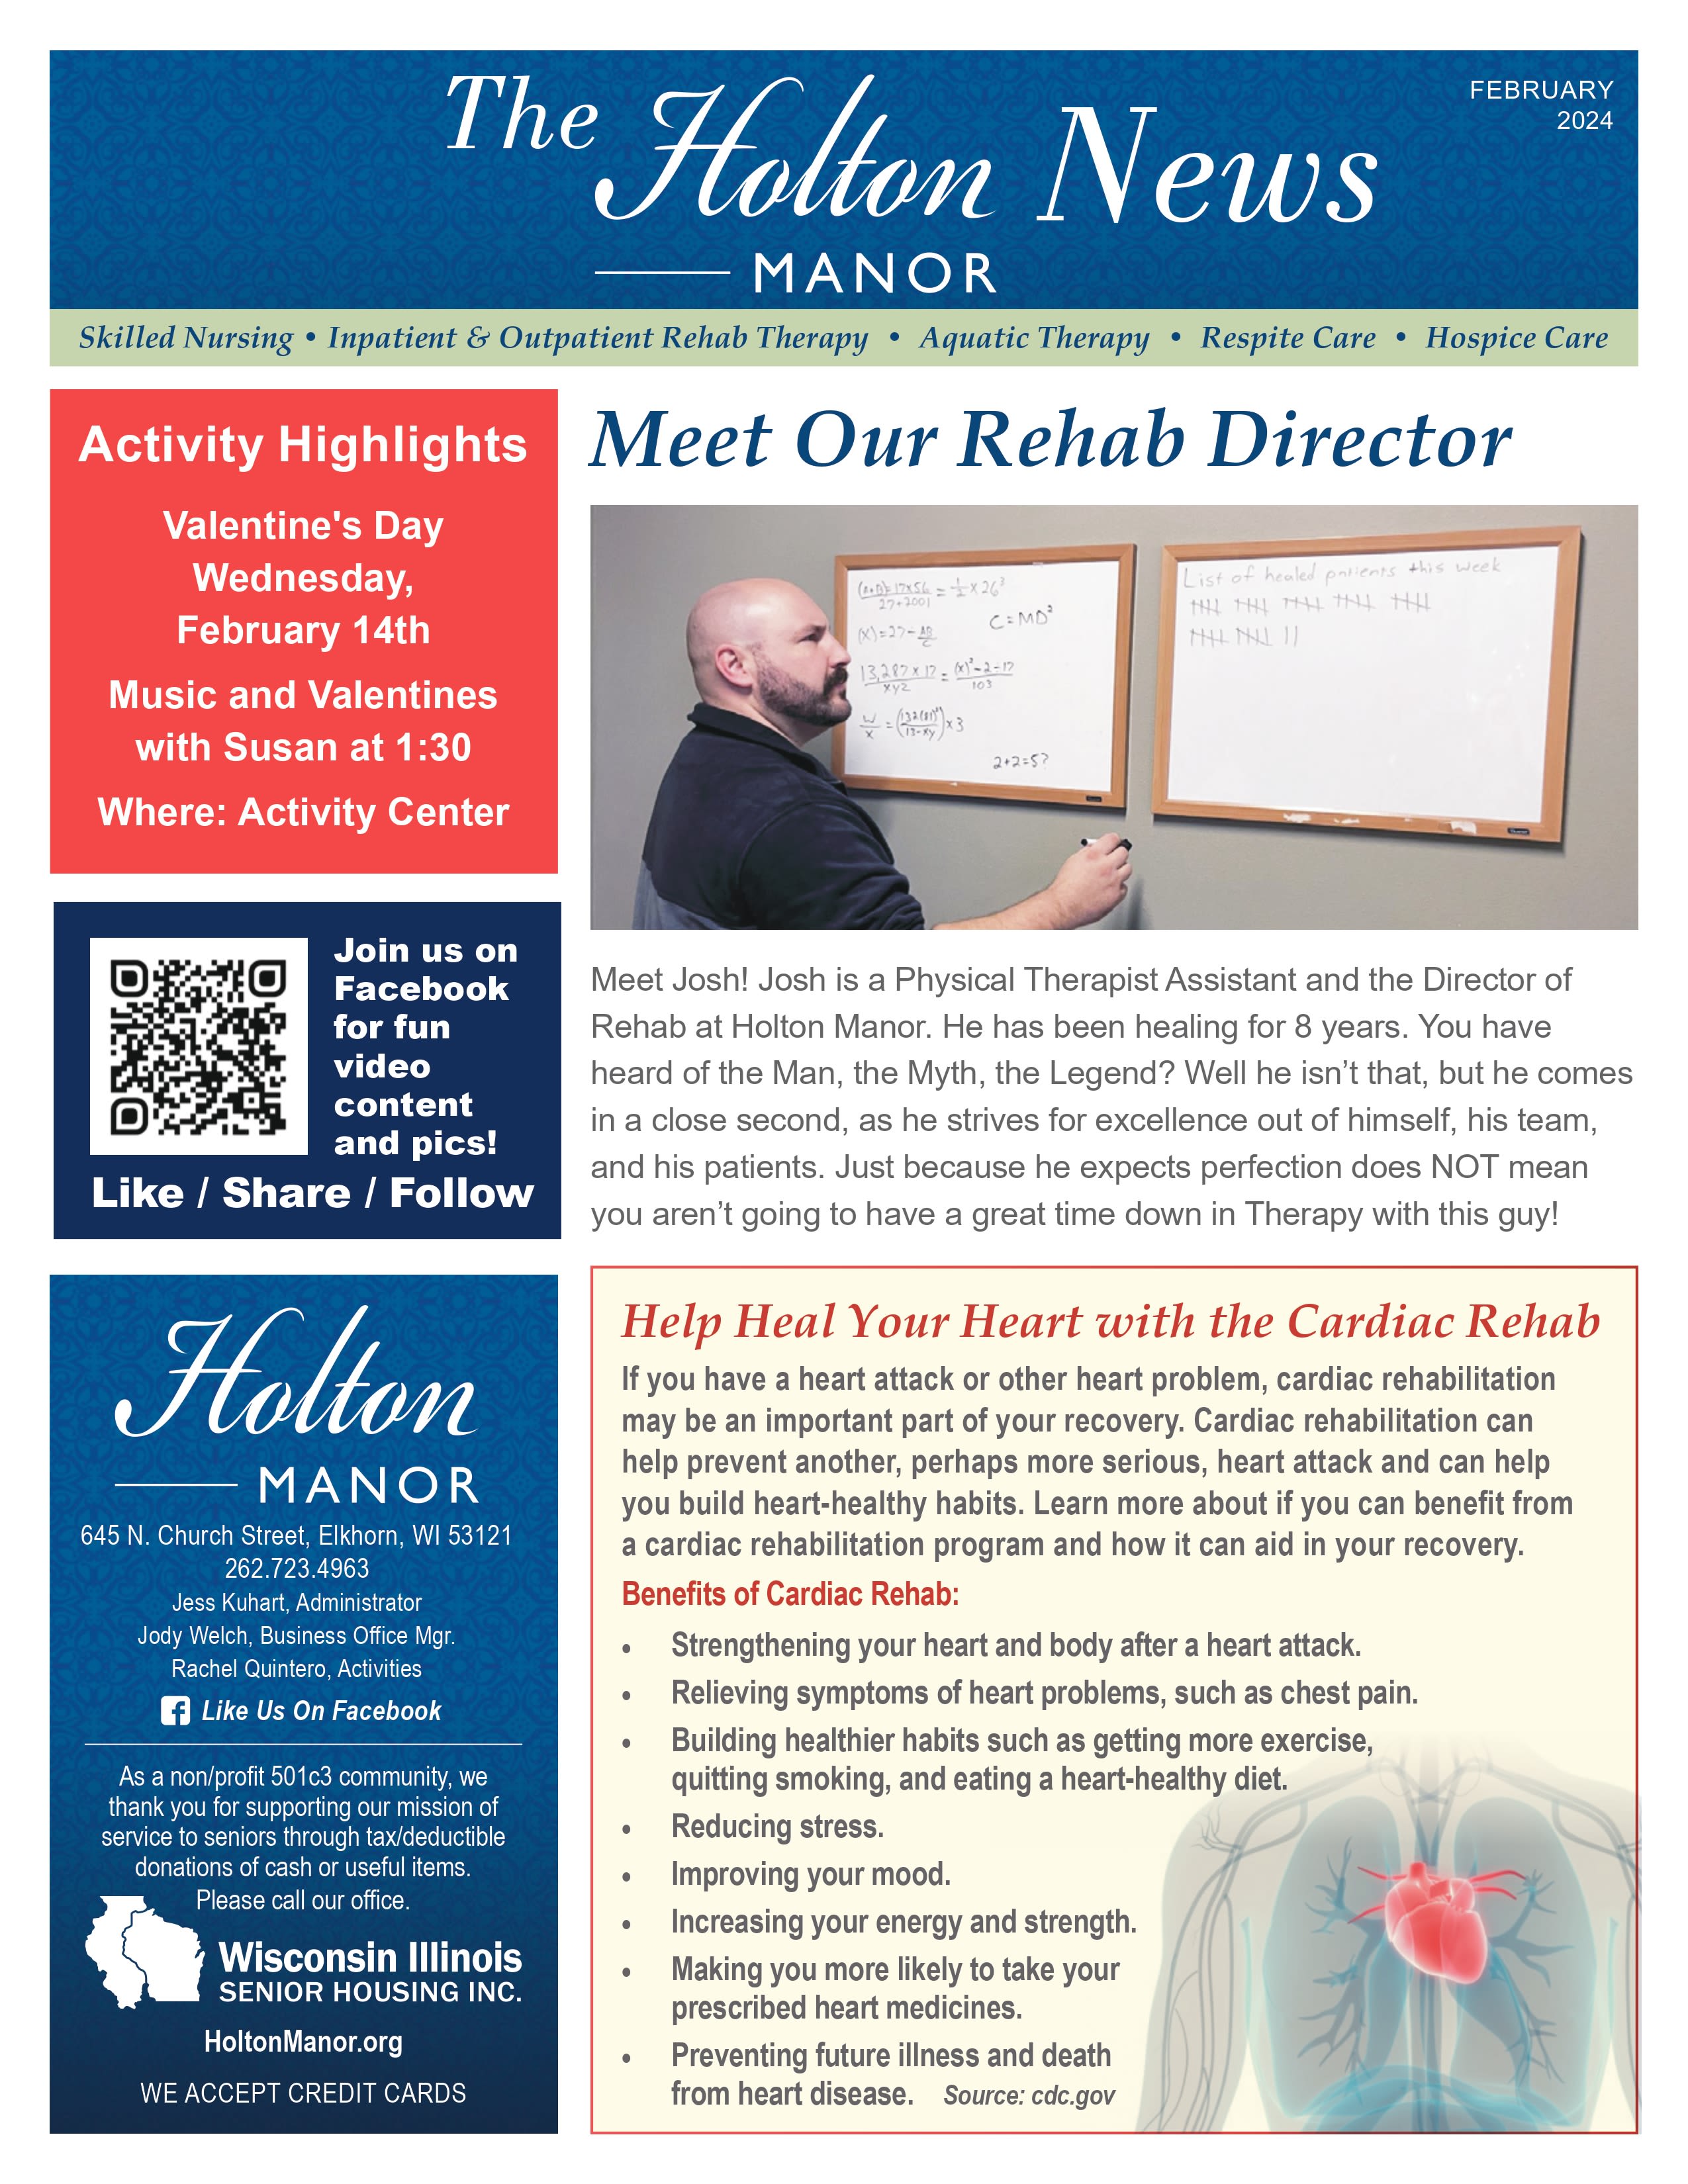 February 2024 Newsletter at Holton Manor in Elkhorn, Wisconsin